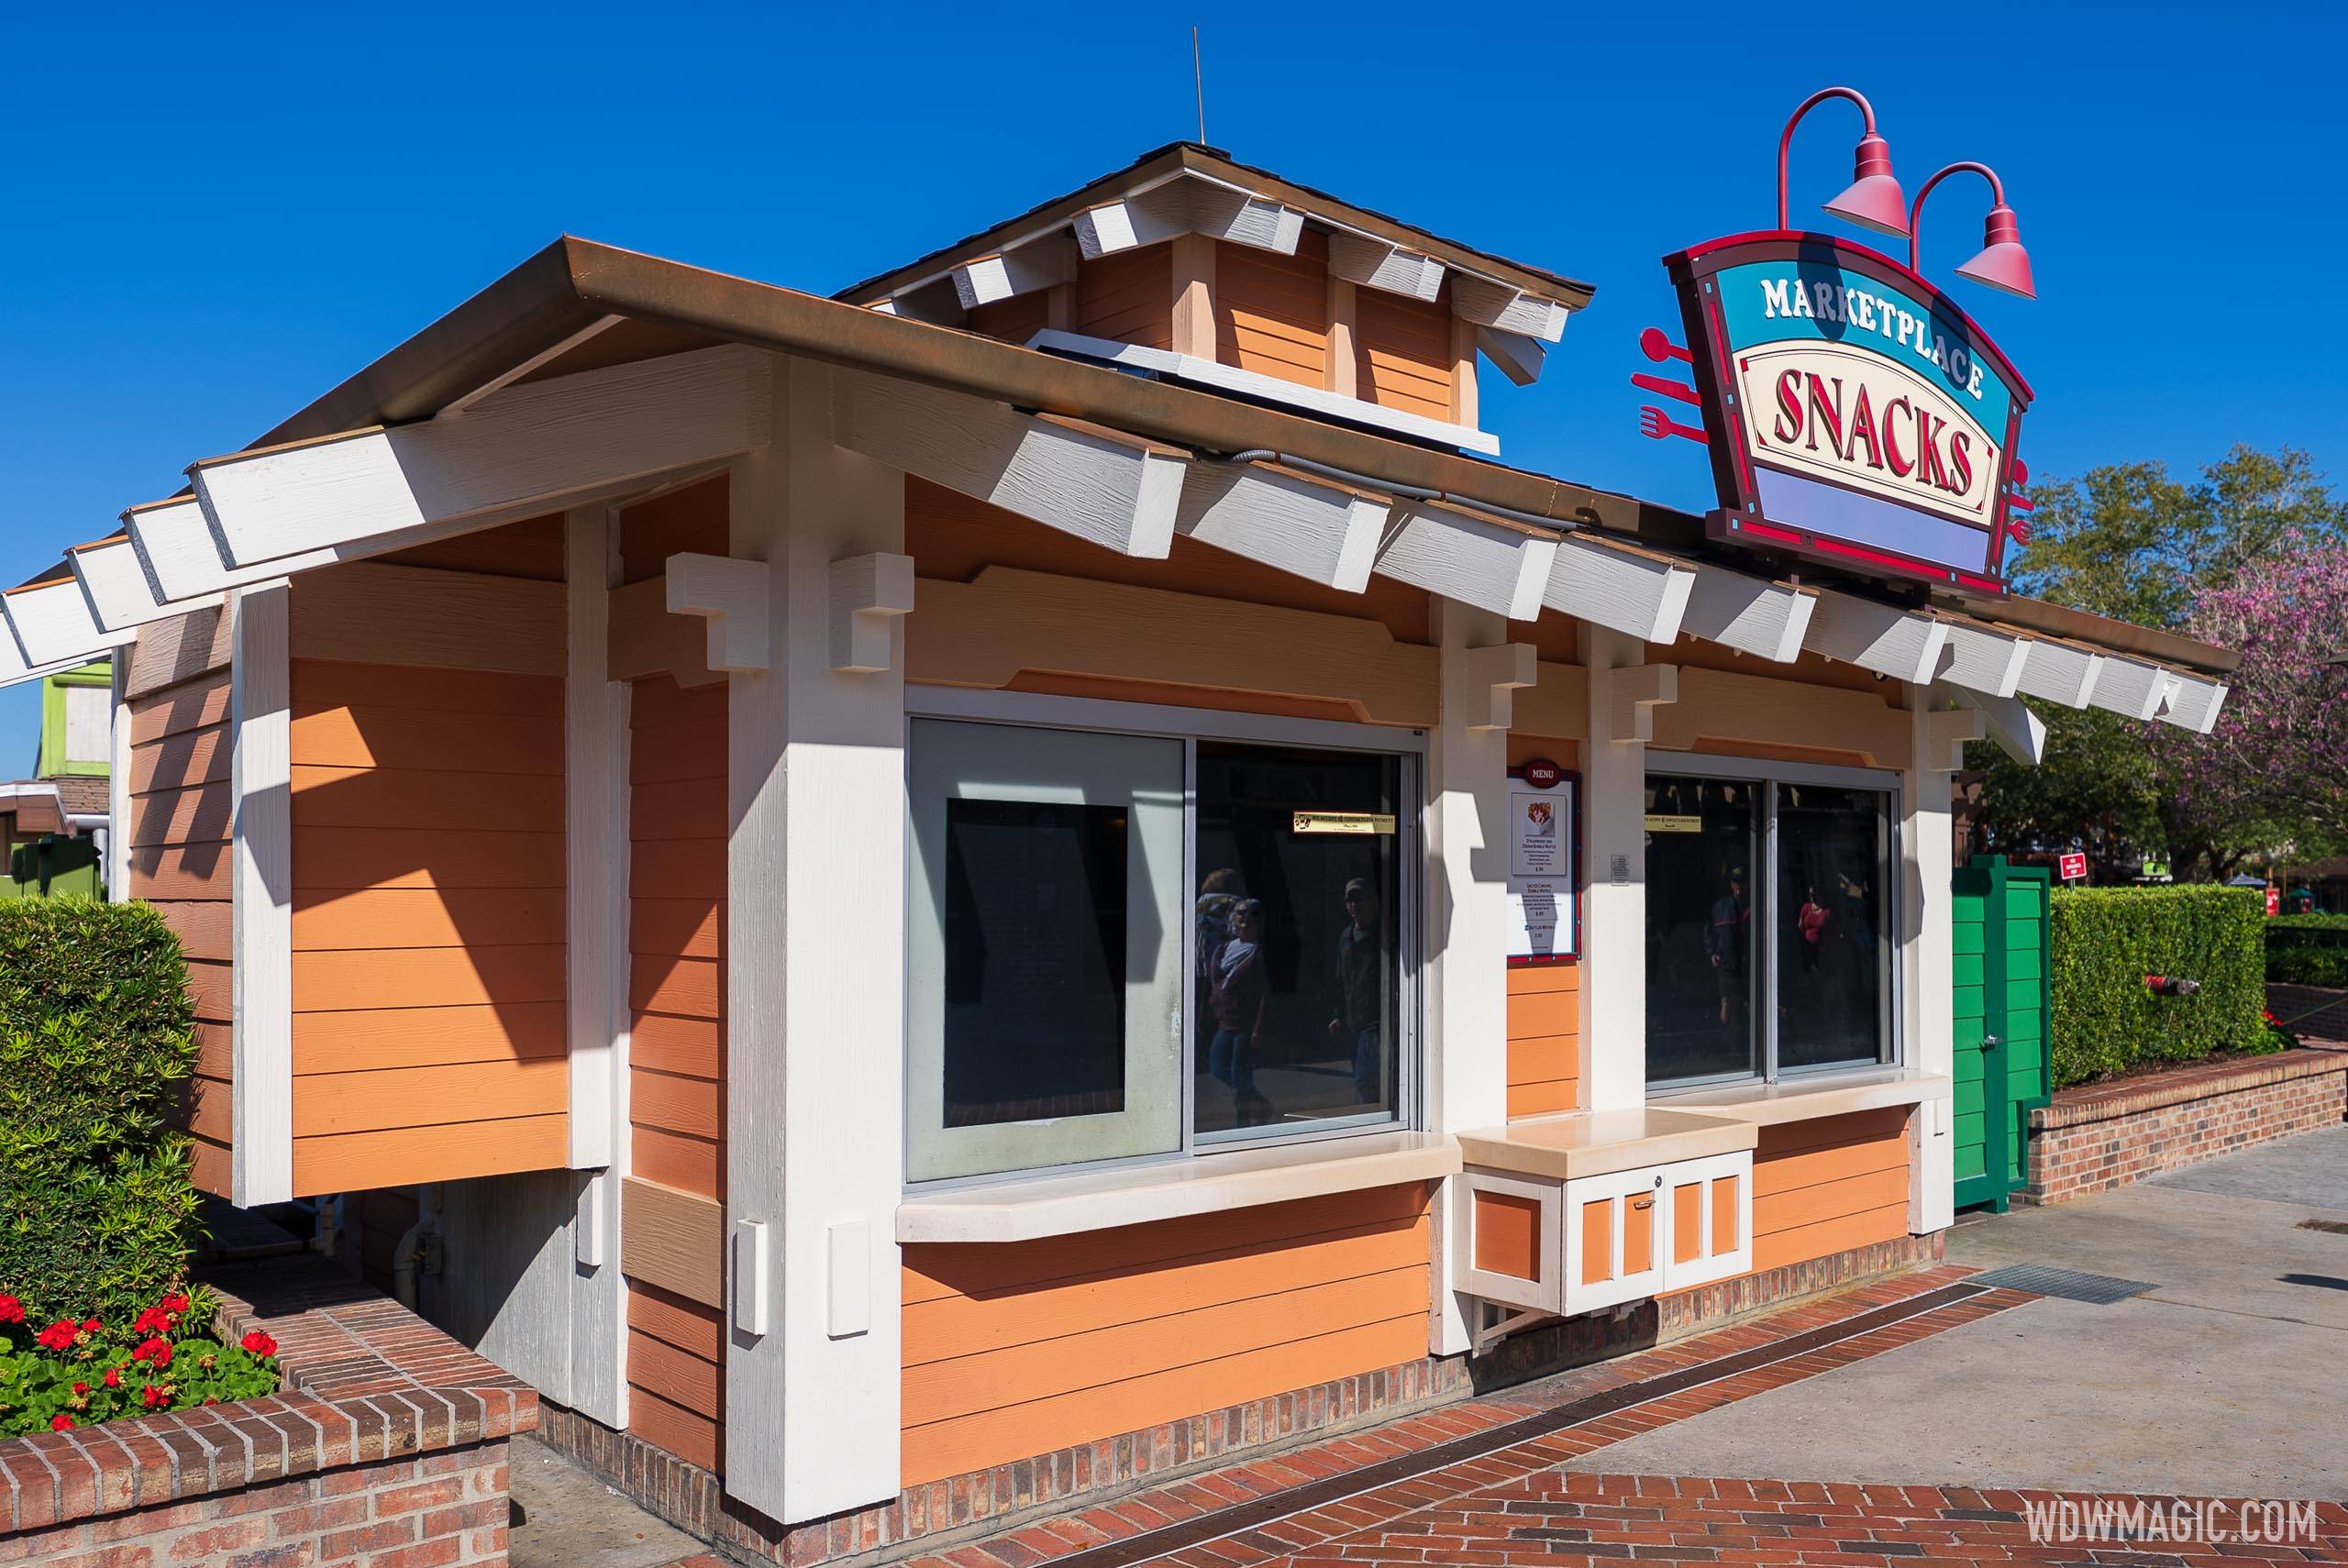 New menu at Marketplace Snacks as Dole Whips move to the new 'Swirls on the Water'